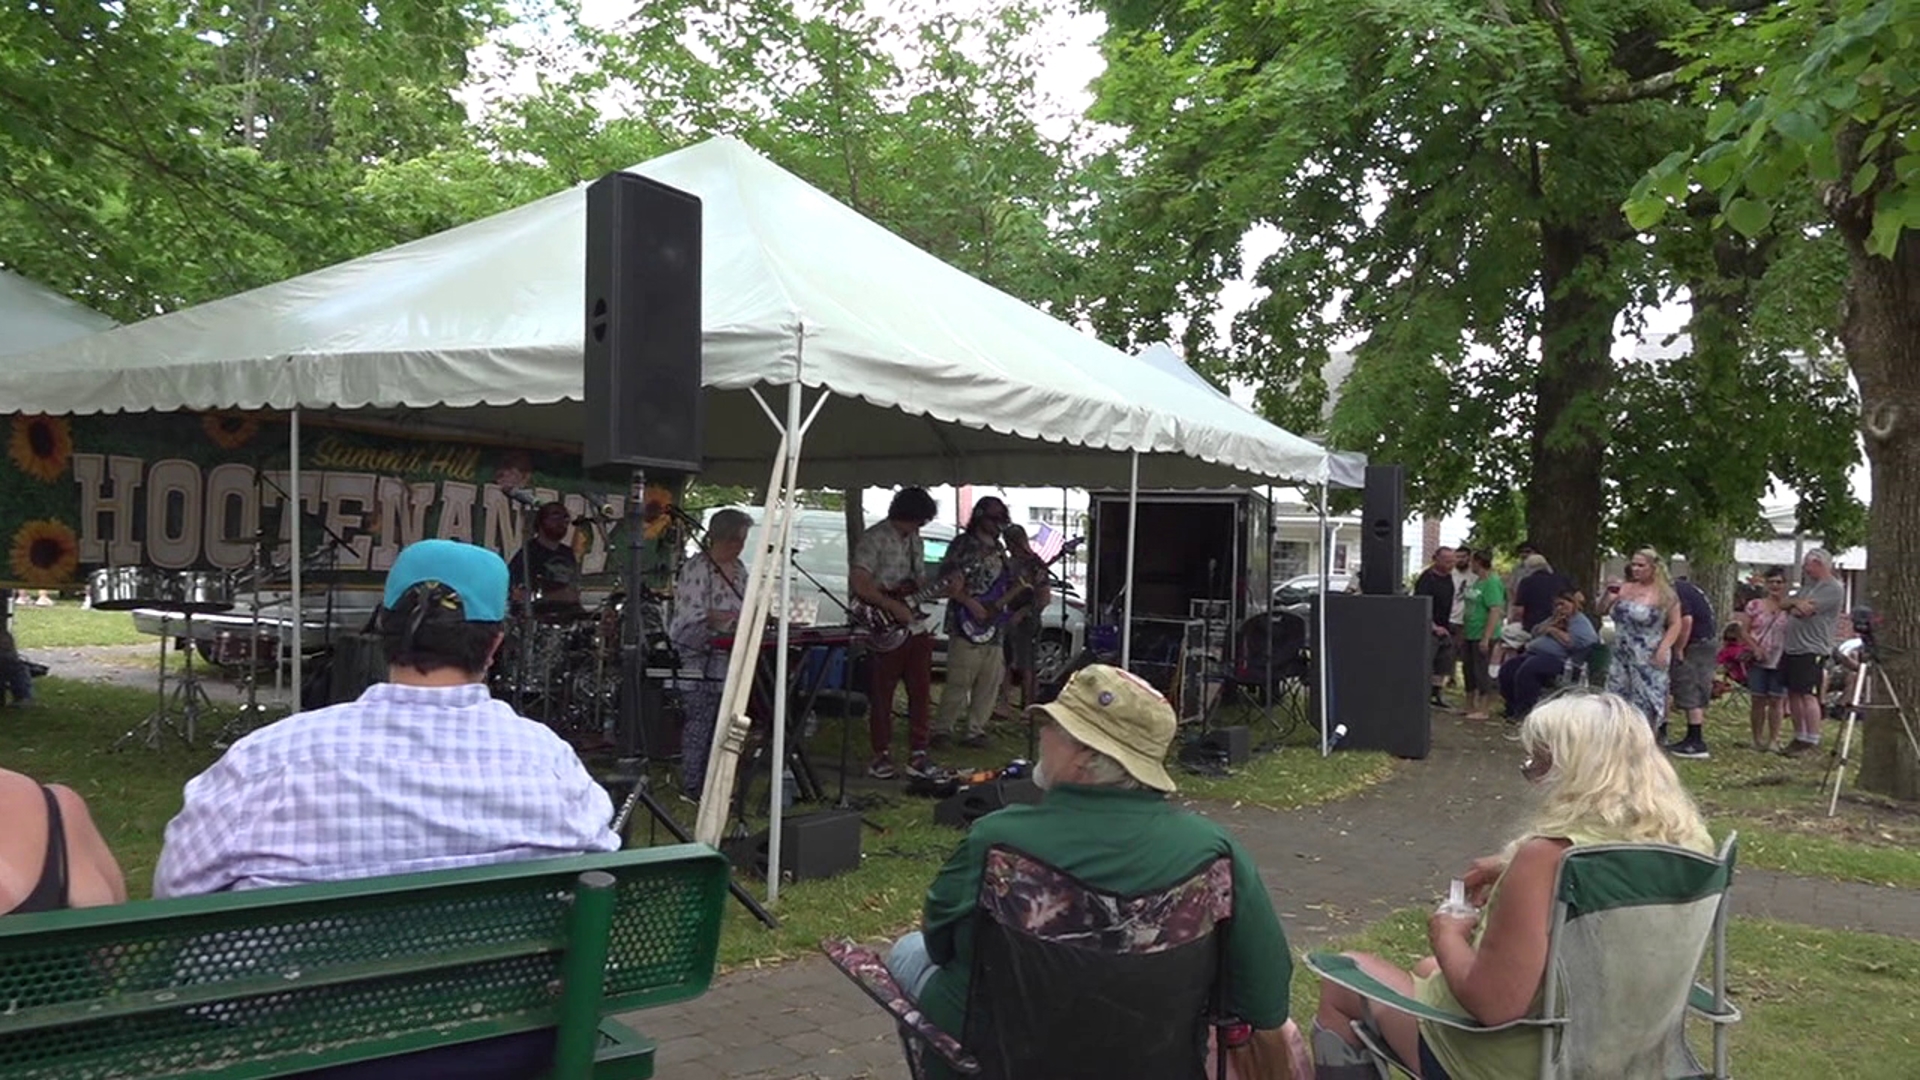 Summit Hill hosted its 11th annual Hootenanny Music Festival in Ludlow Park on Sunday.